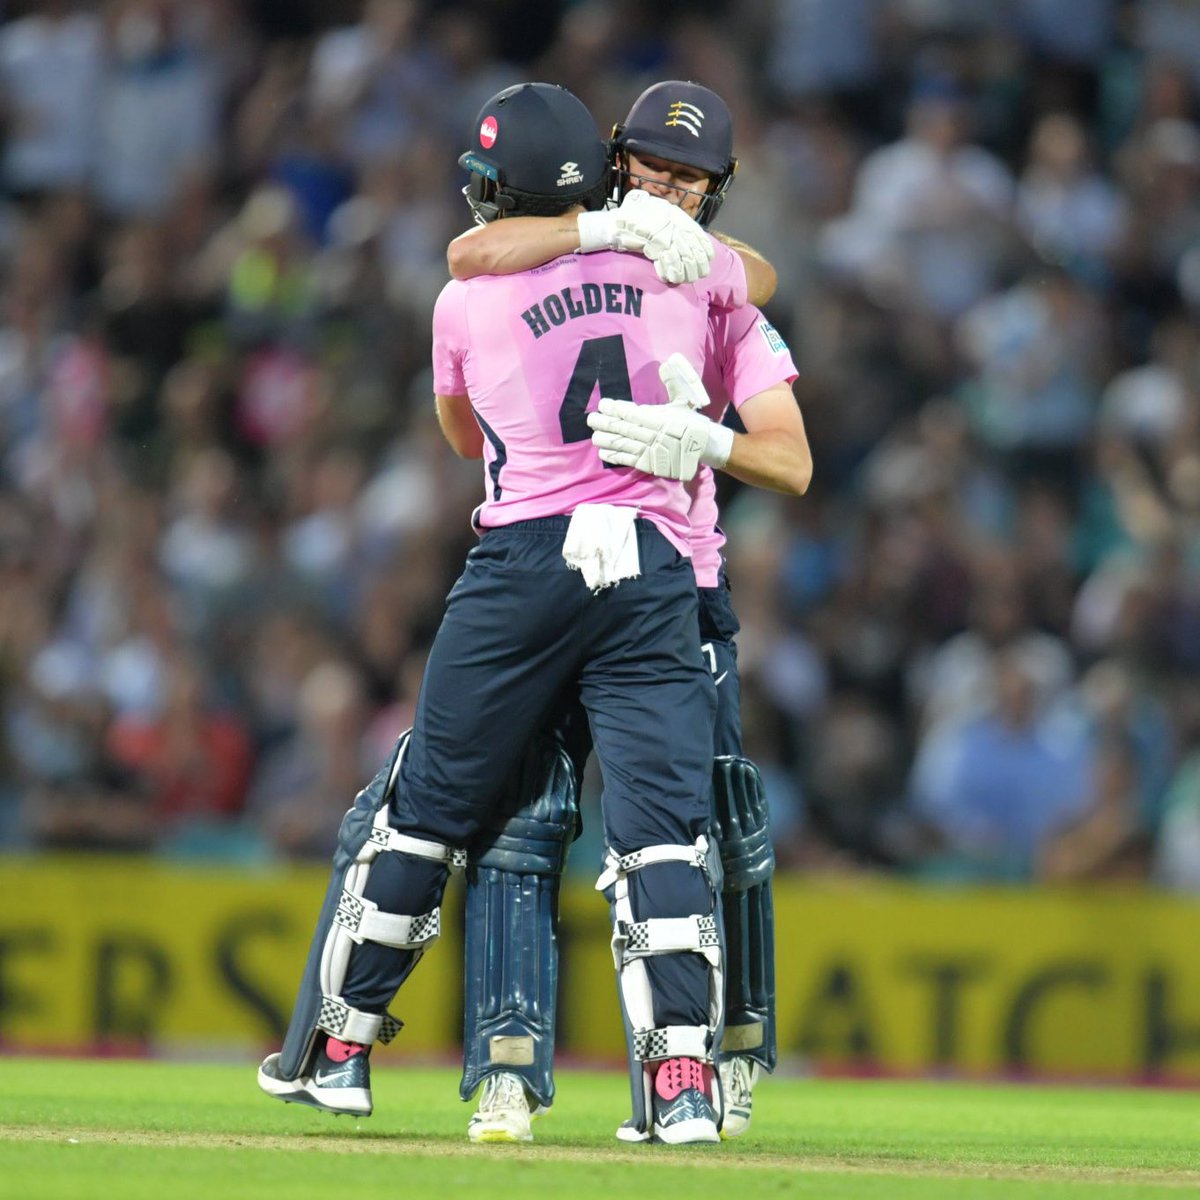 Incredible! @Middlesex_CCC achieve the highest ever run chase in T20 Blast history. They beat @surreycricket by 7 wickets in the London derby chasing down 253. bbc.co.uk/sport/live/cri… #BBCCricket